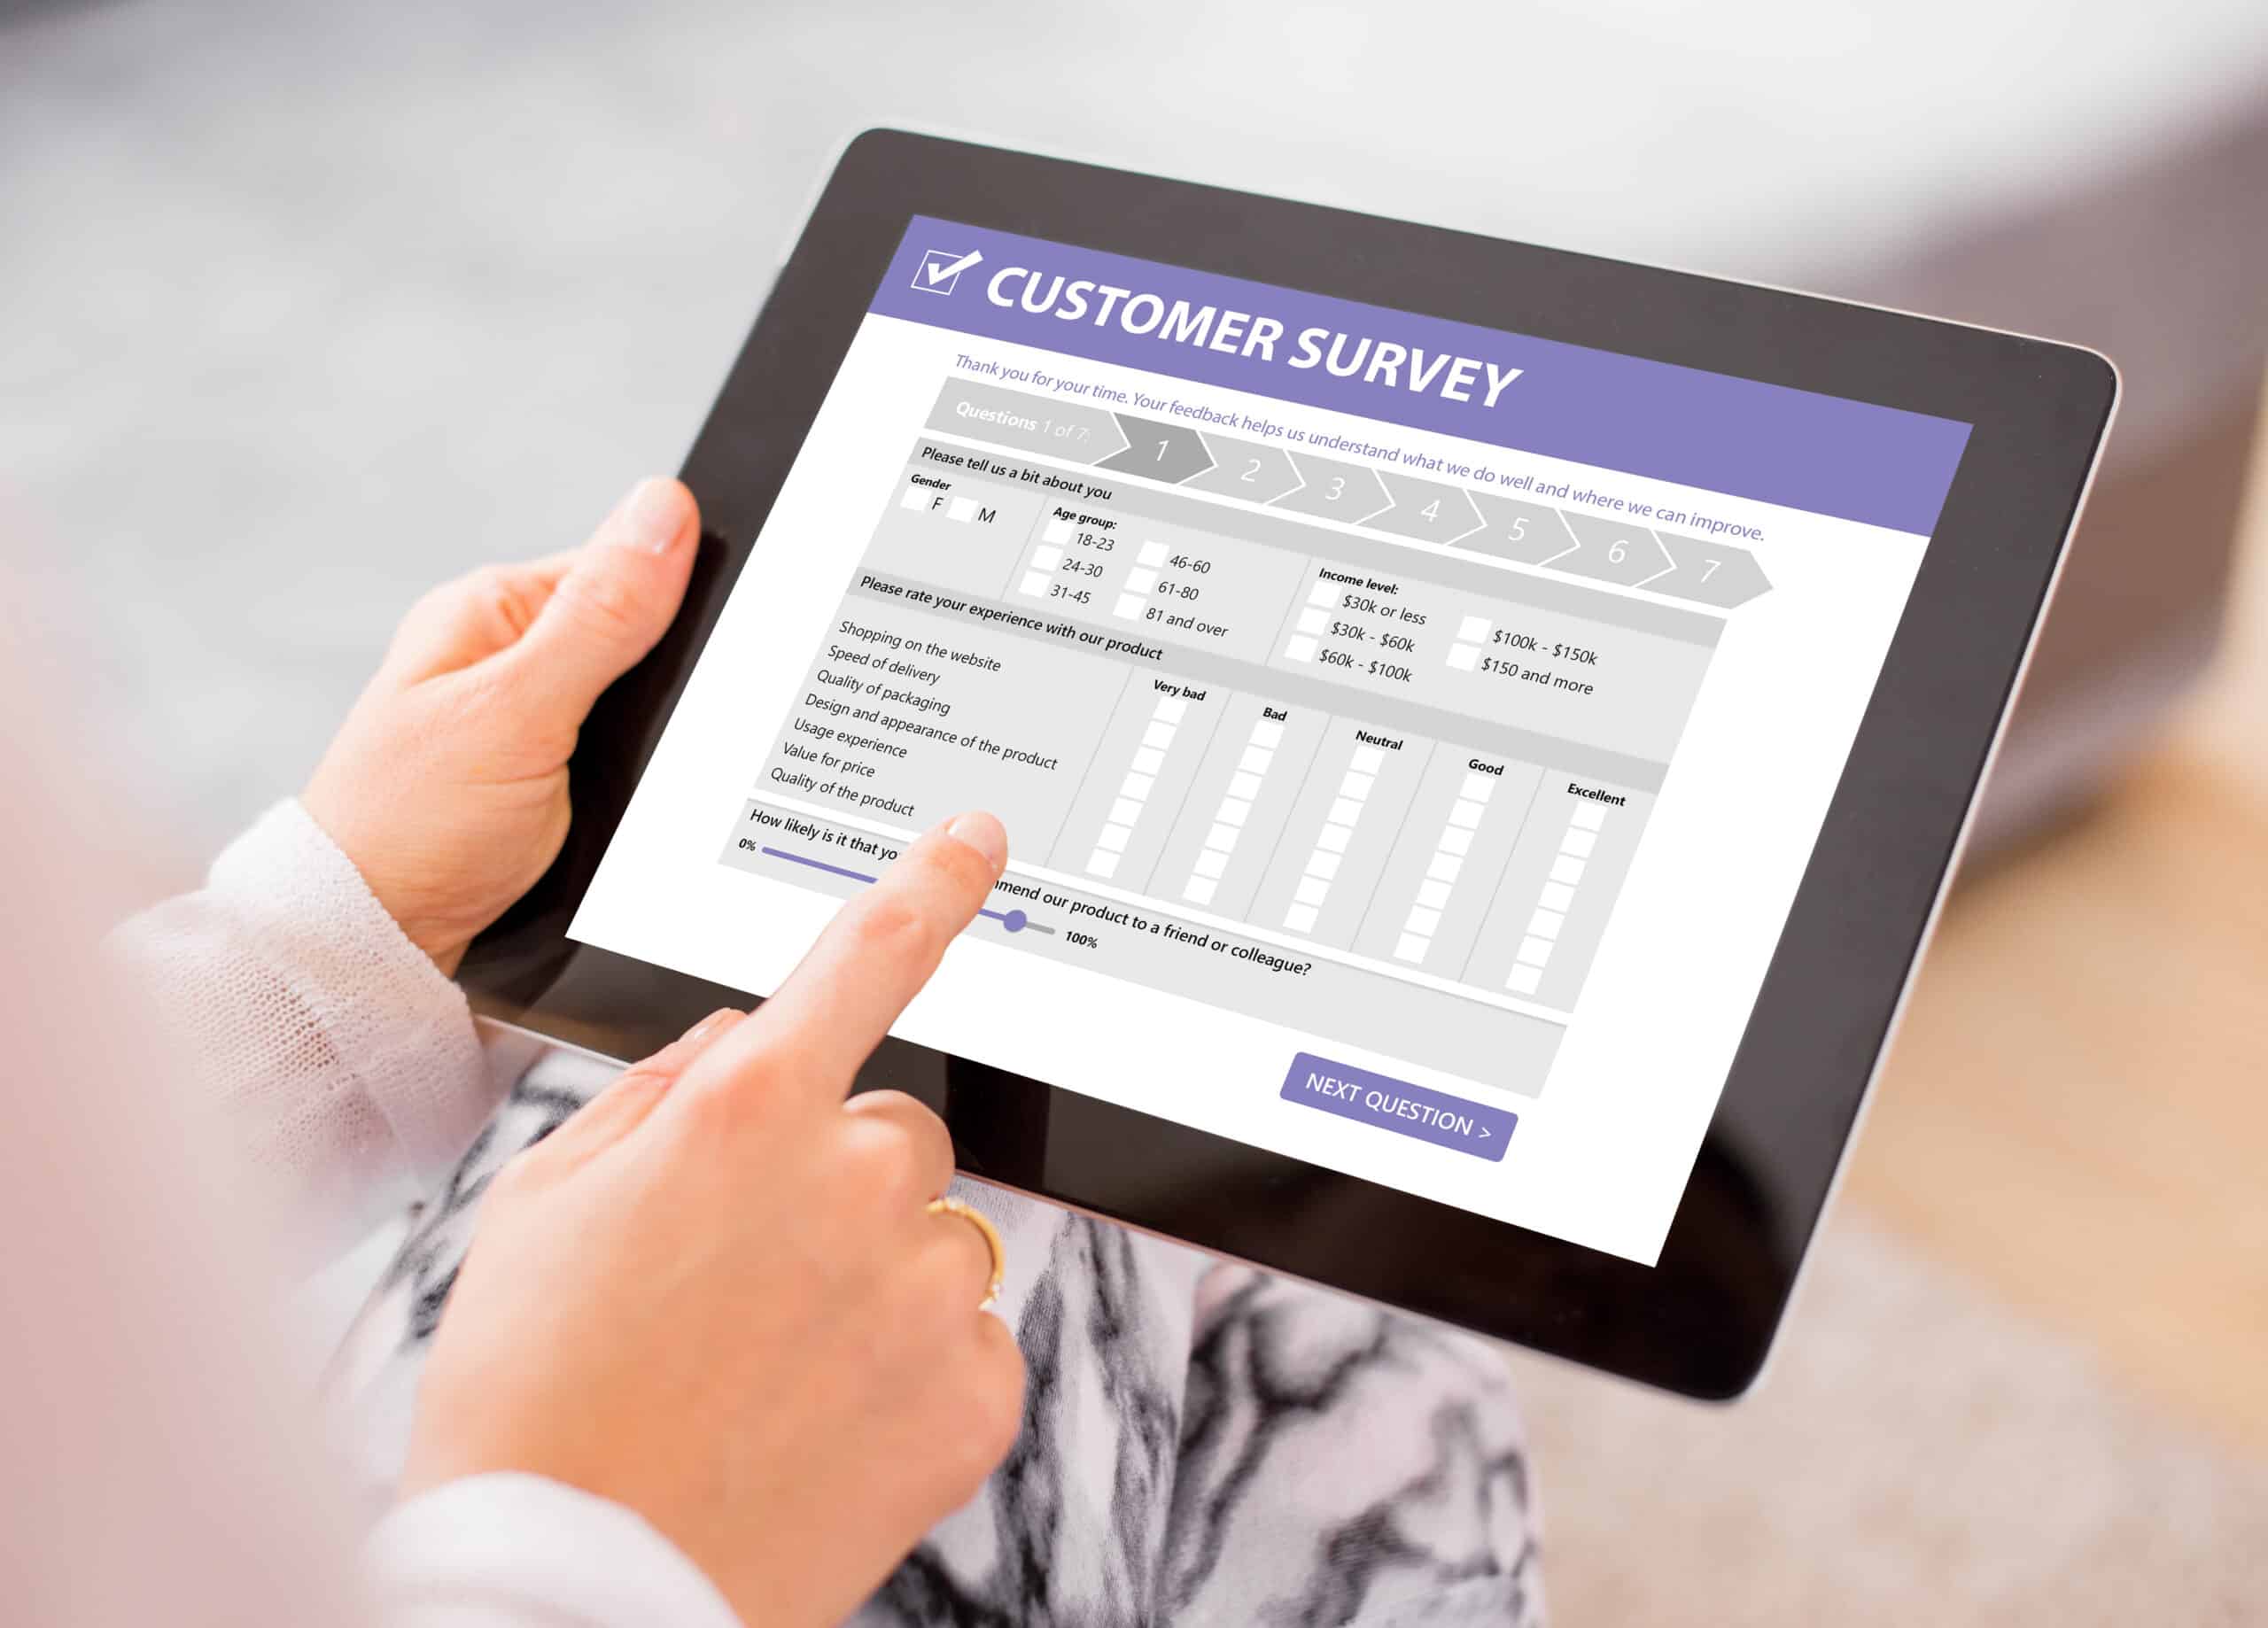 Customer survey as part of primary research